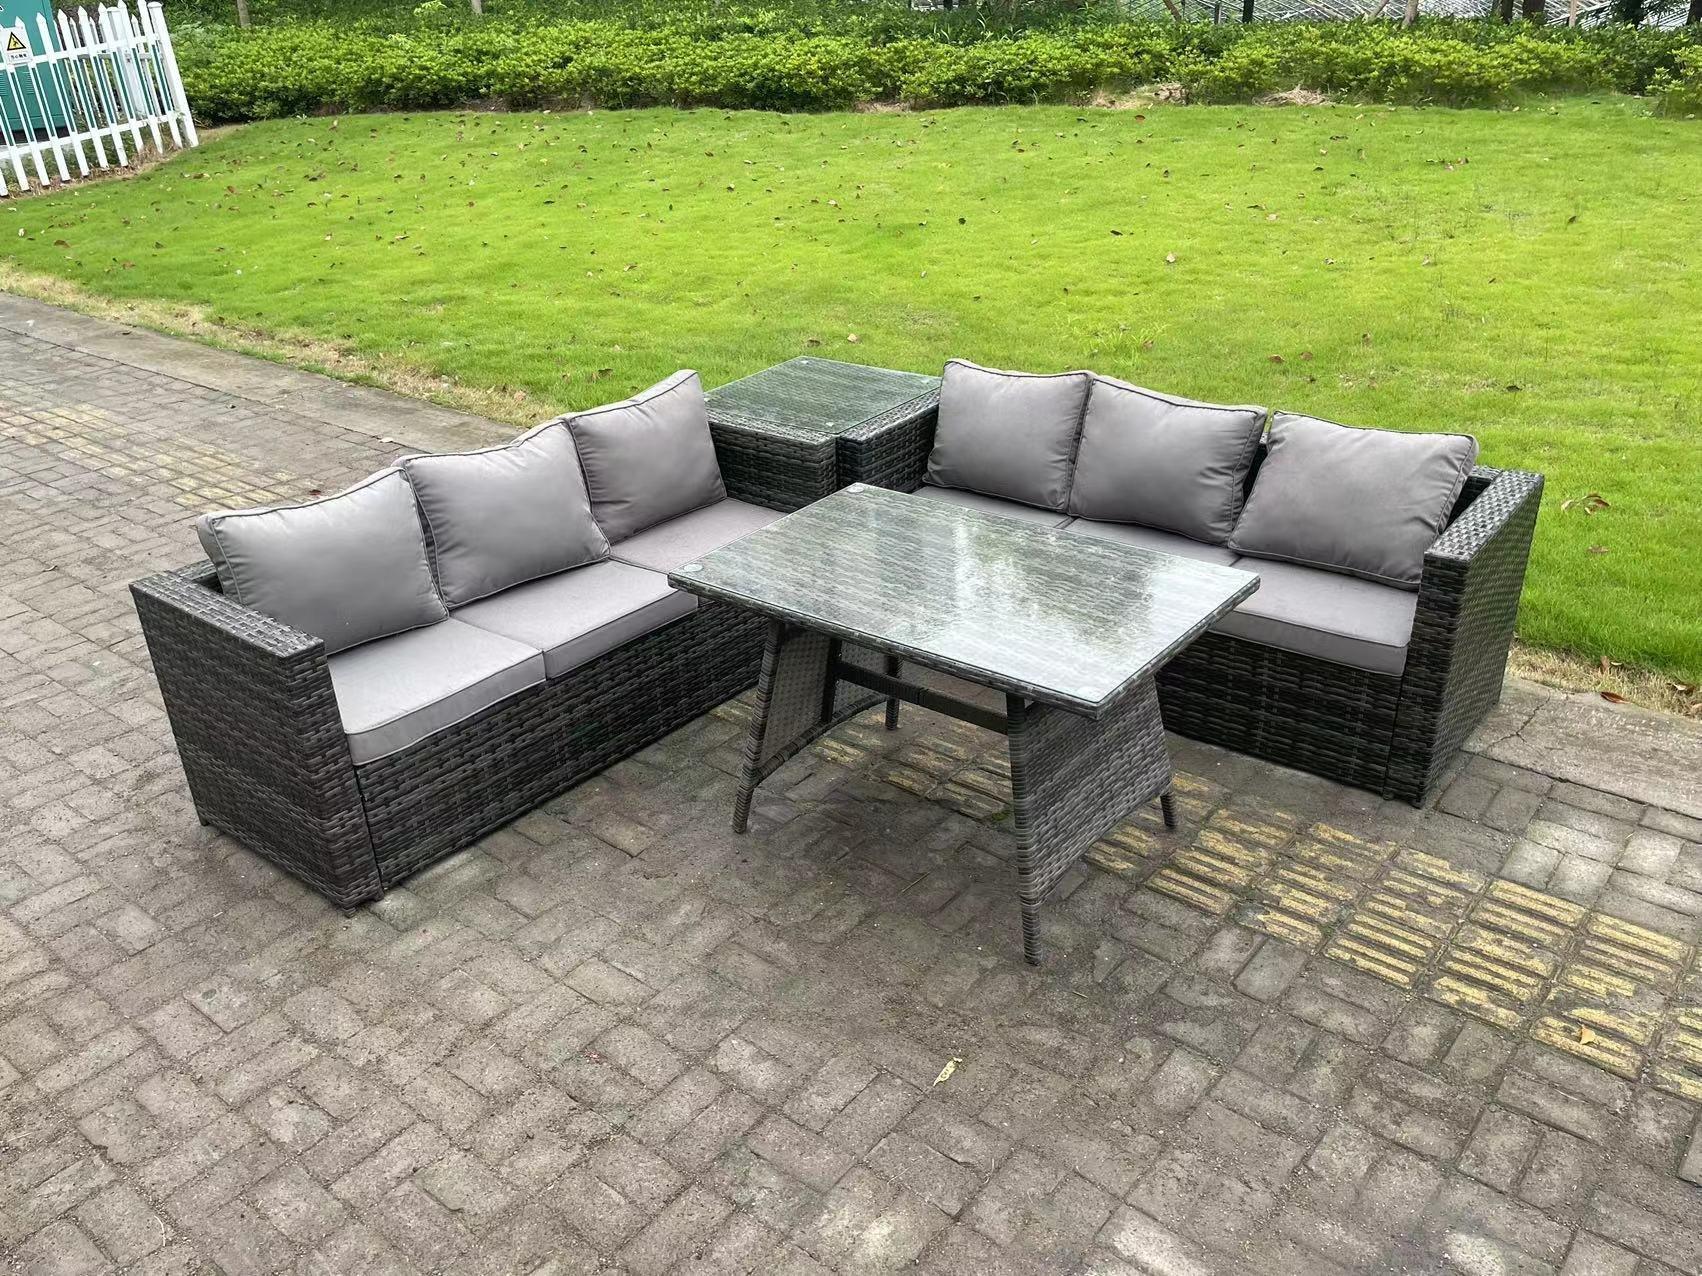 6 Seater Wicker PE Rattan Garden Dining Set Outdoor Furniture Sofa with Side Table Dining Table